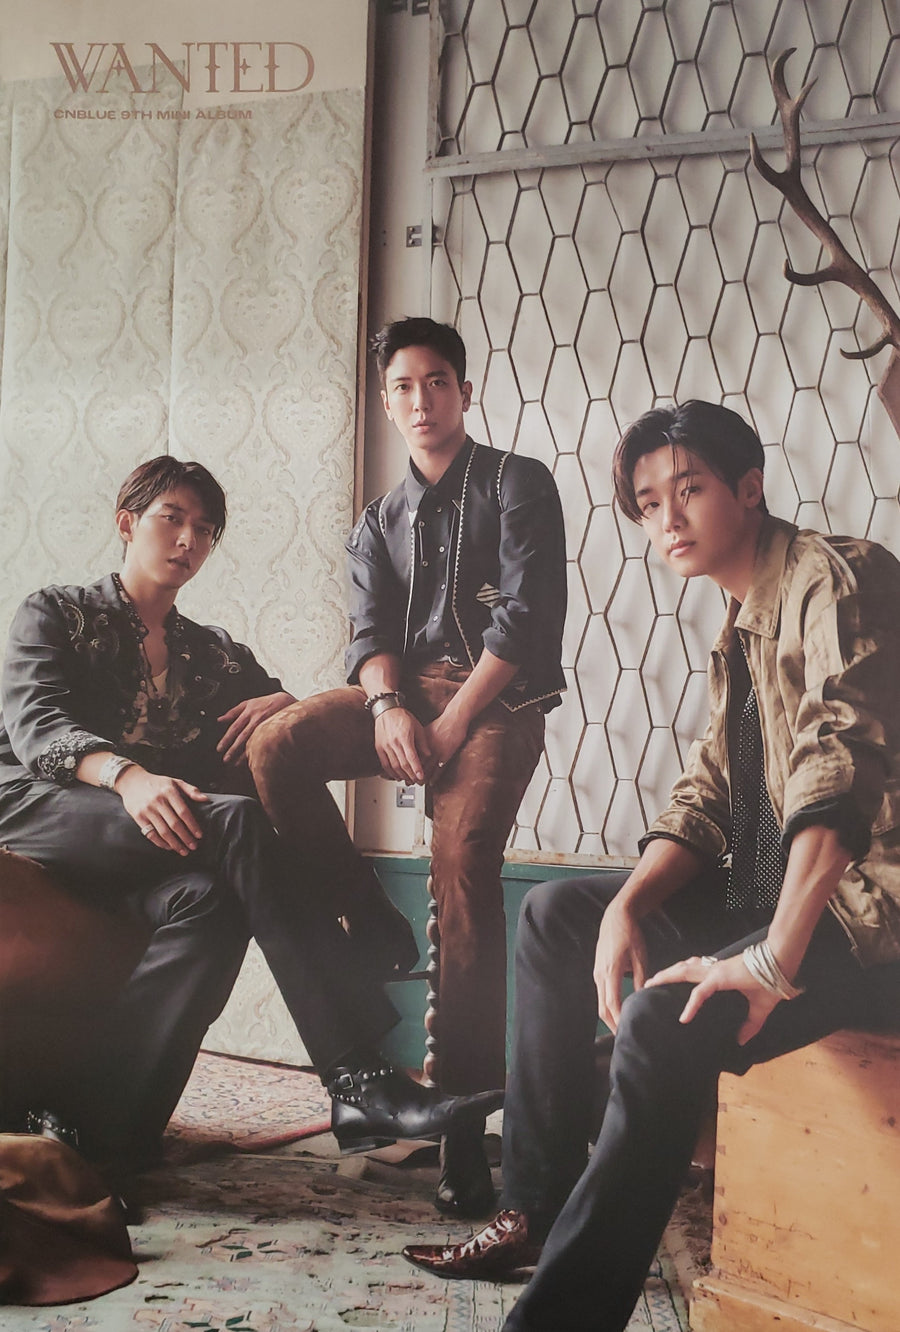 CNBLUE 9th Mini Album Wanted Official Poster - Photo Concept Alive